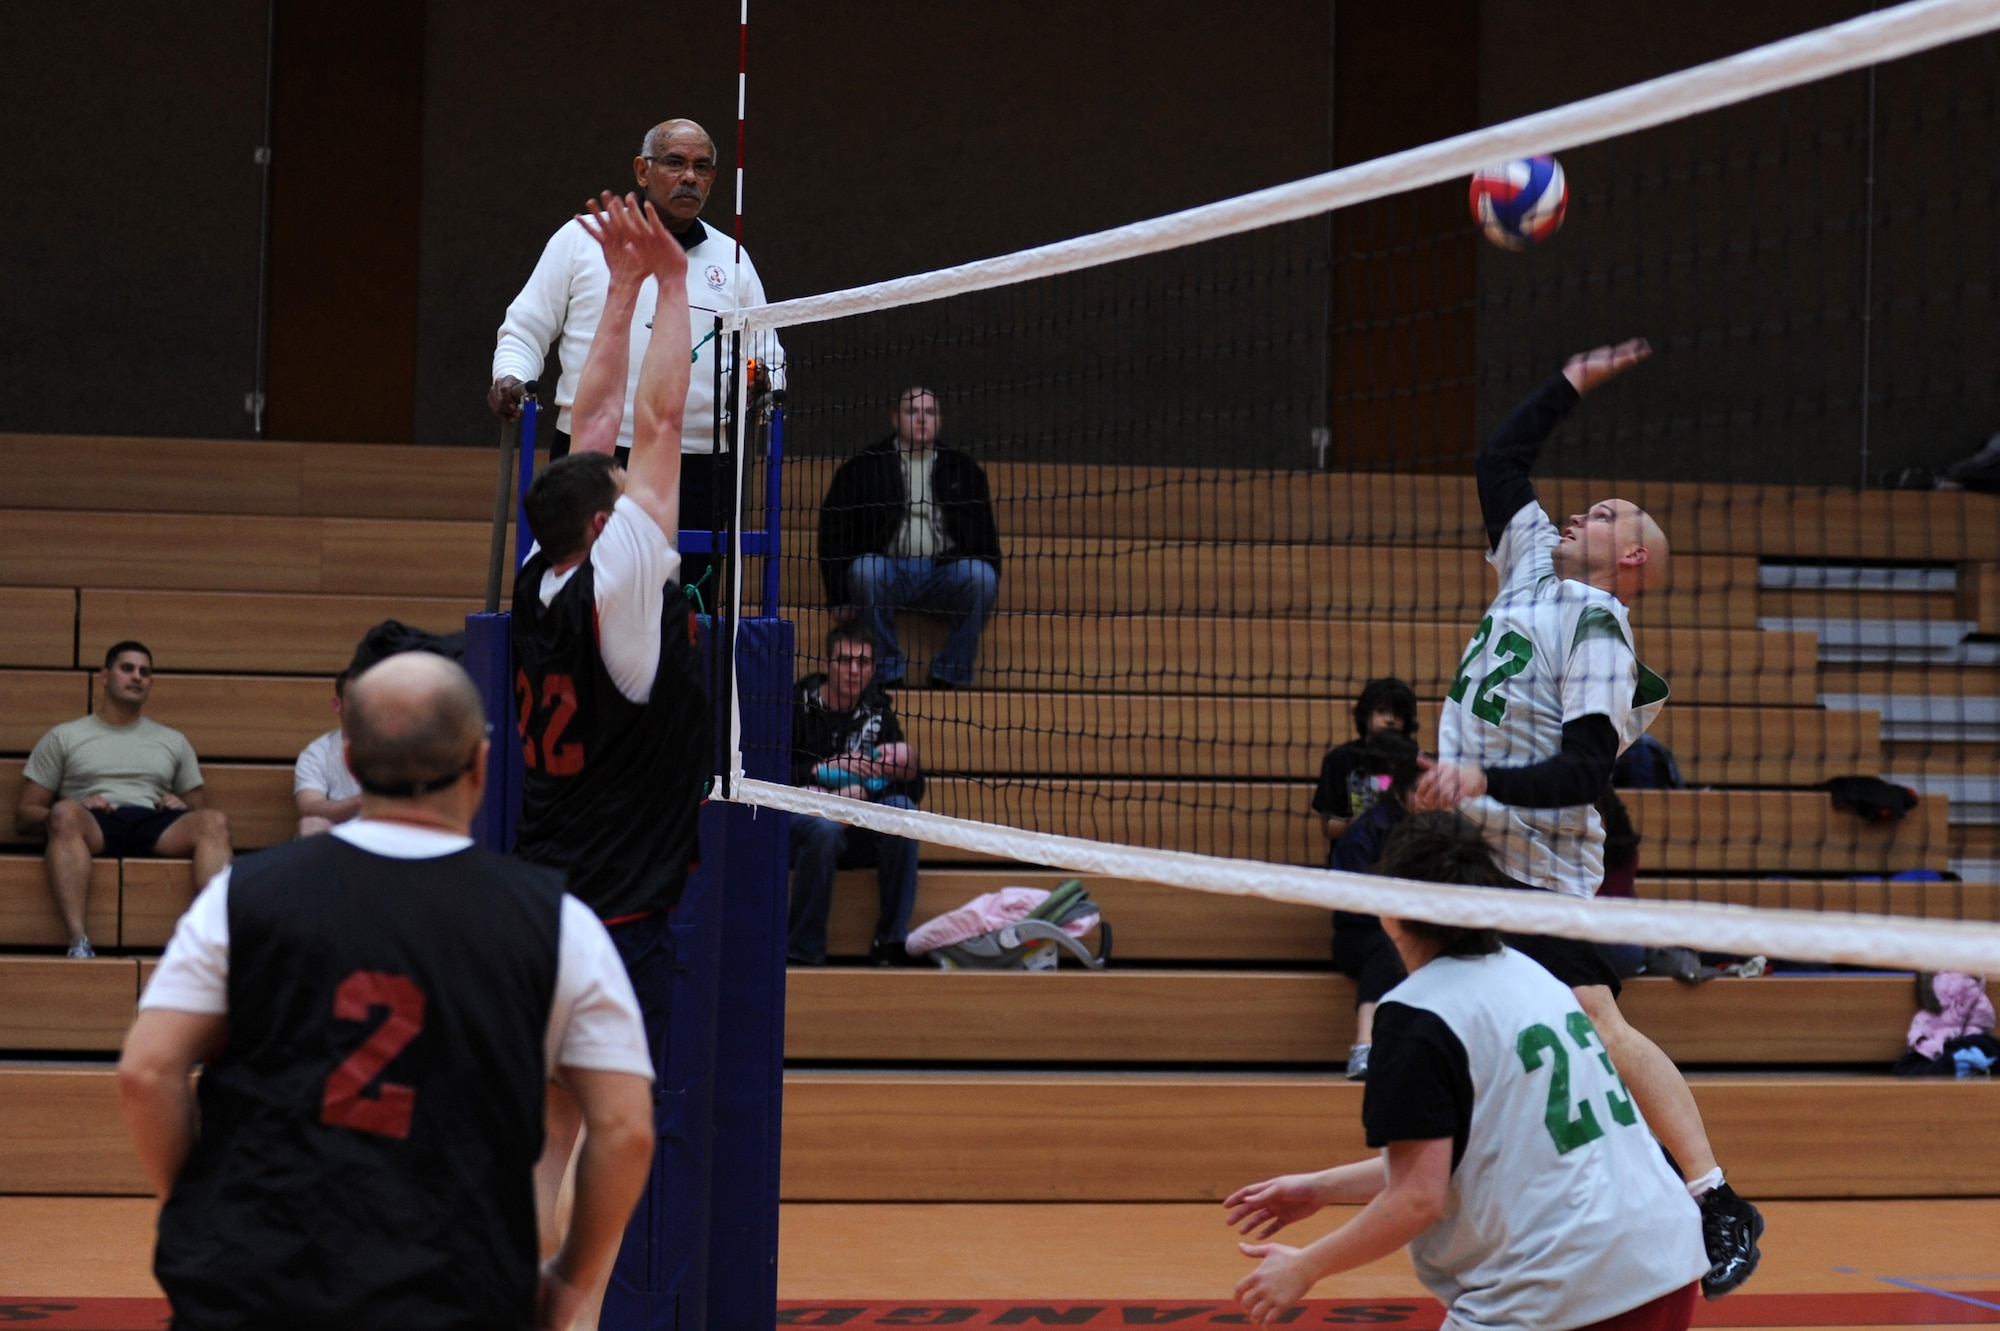 SPANGDAHLEM AIR BASE, Germany – Troy Soeder, 606th Air Control Squadron, number 22, jumps to hit the volleyball over 52nd Force Support squadron defenders during an intramural volleyball game at the Skelton Memorial Fitness Center here Feb. 15. FSS defeated ACS in two sets, 25-16 and 26-24.  This match kicked off the intramural volleyball season, and games will be played Monday – Thursday beginning at 6:30 p.m. at the fitness center. (U.S. Air Force photo by Airman 1st Class Matthew B. Fredericks/Released)